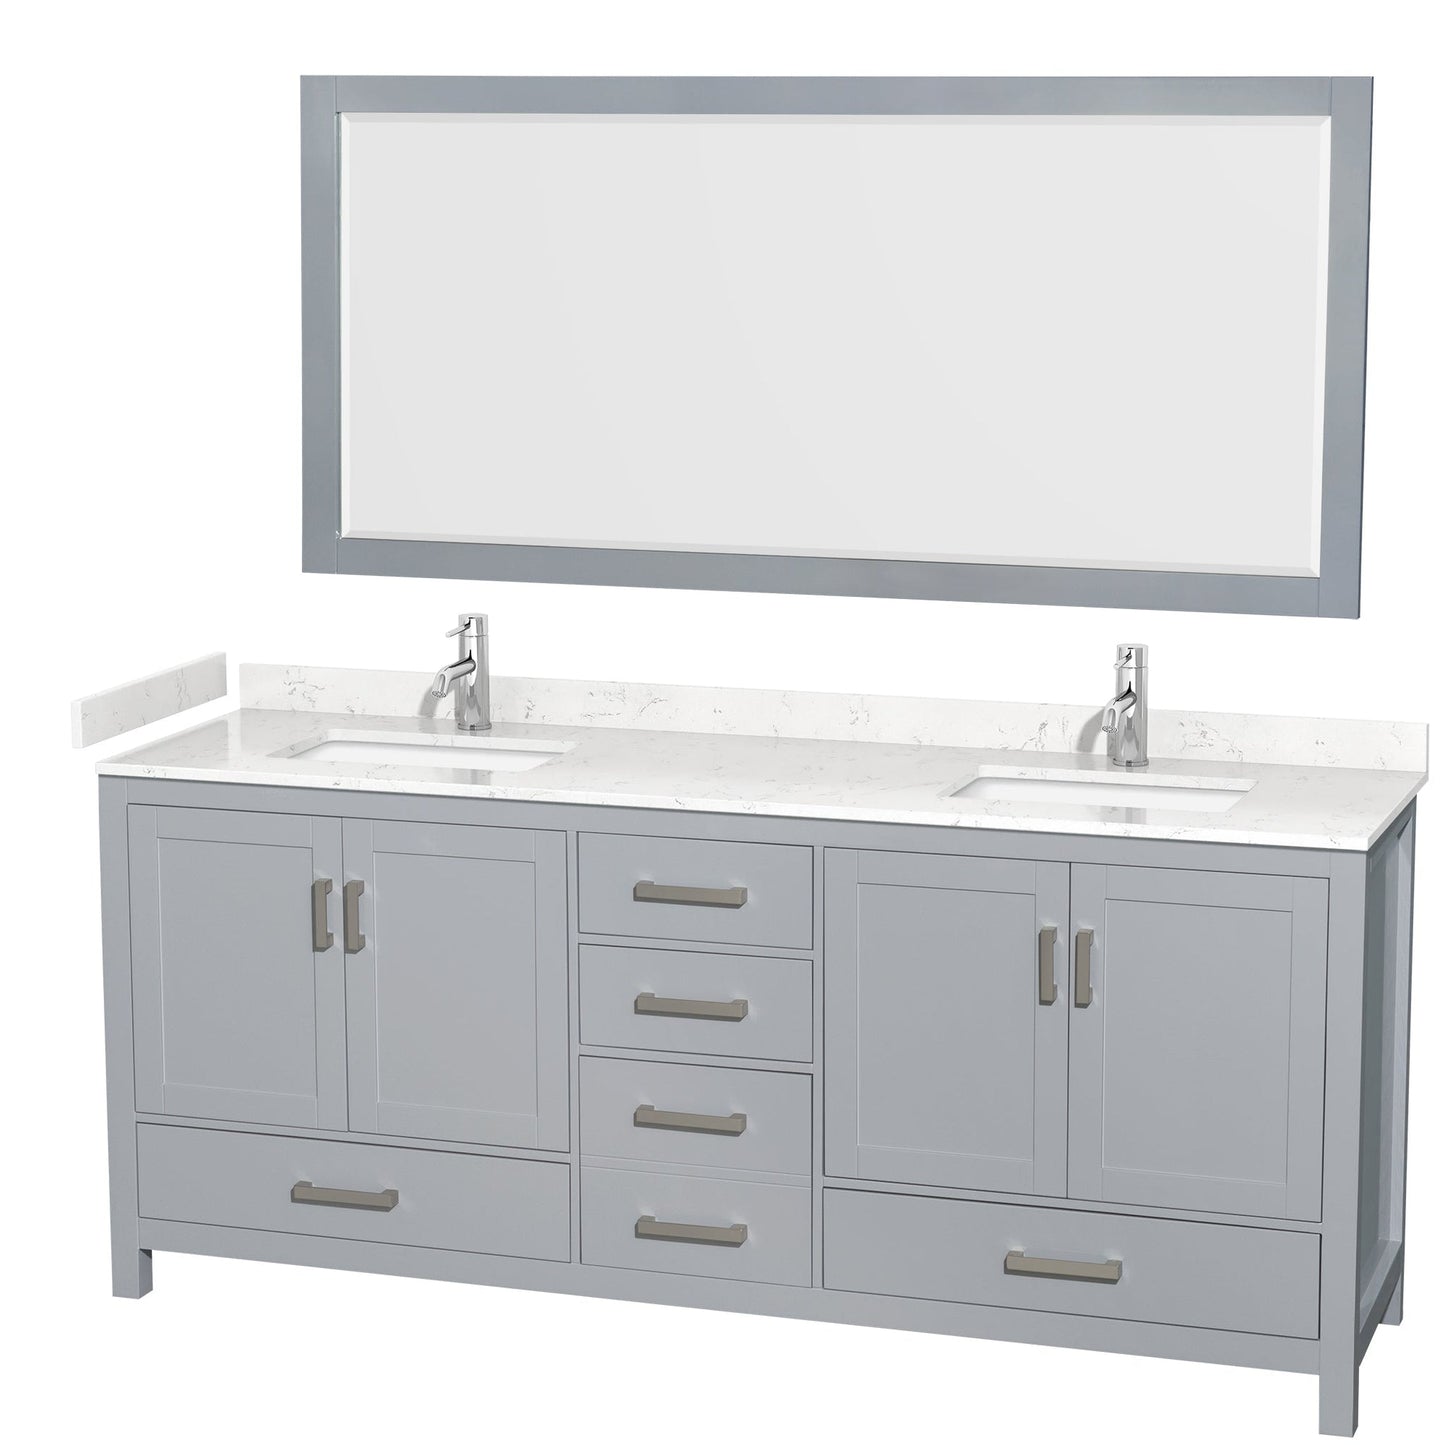 Wyndham Collection Sheffield 80" Double Bathroom Vanity in Gray, Carrara Cultured Marble Countertop, Undermount Square Sinks, 70" Mirror